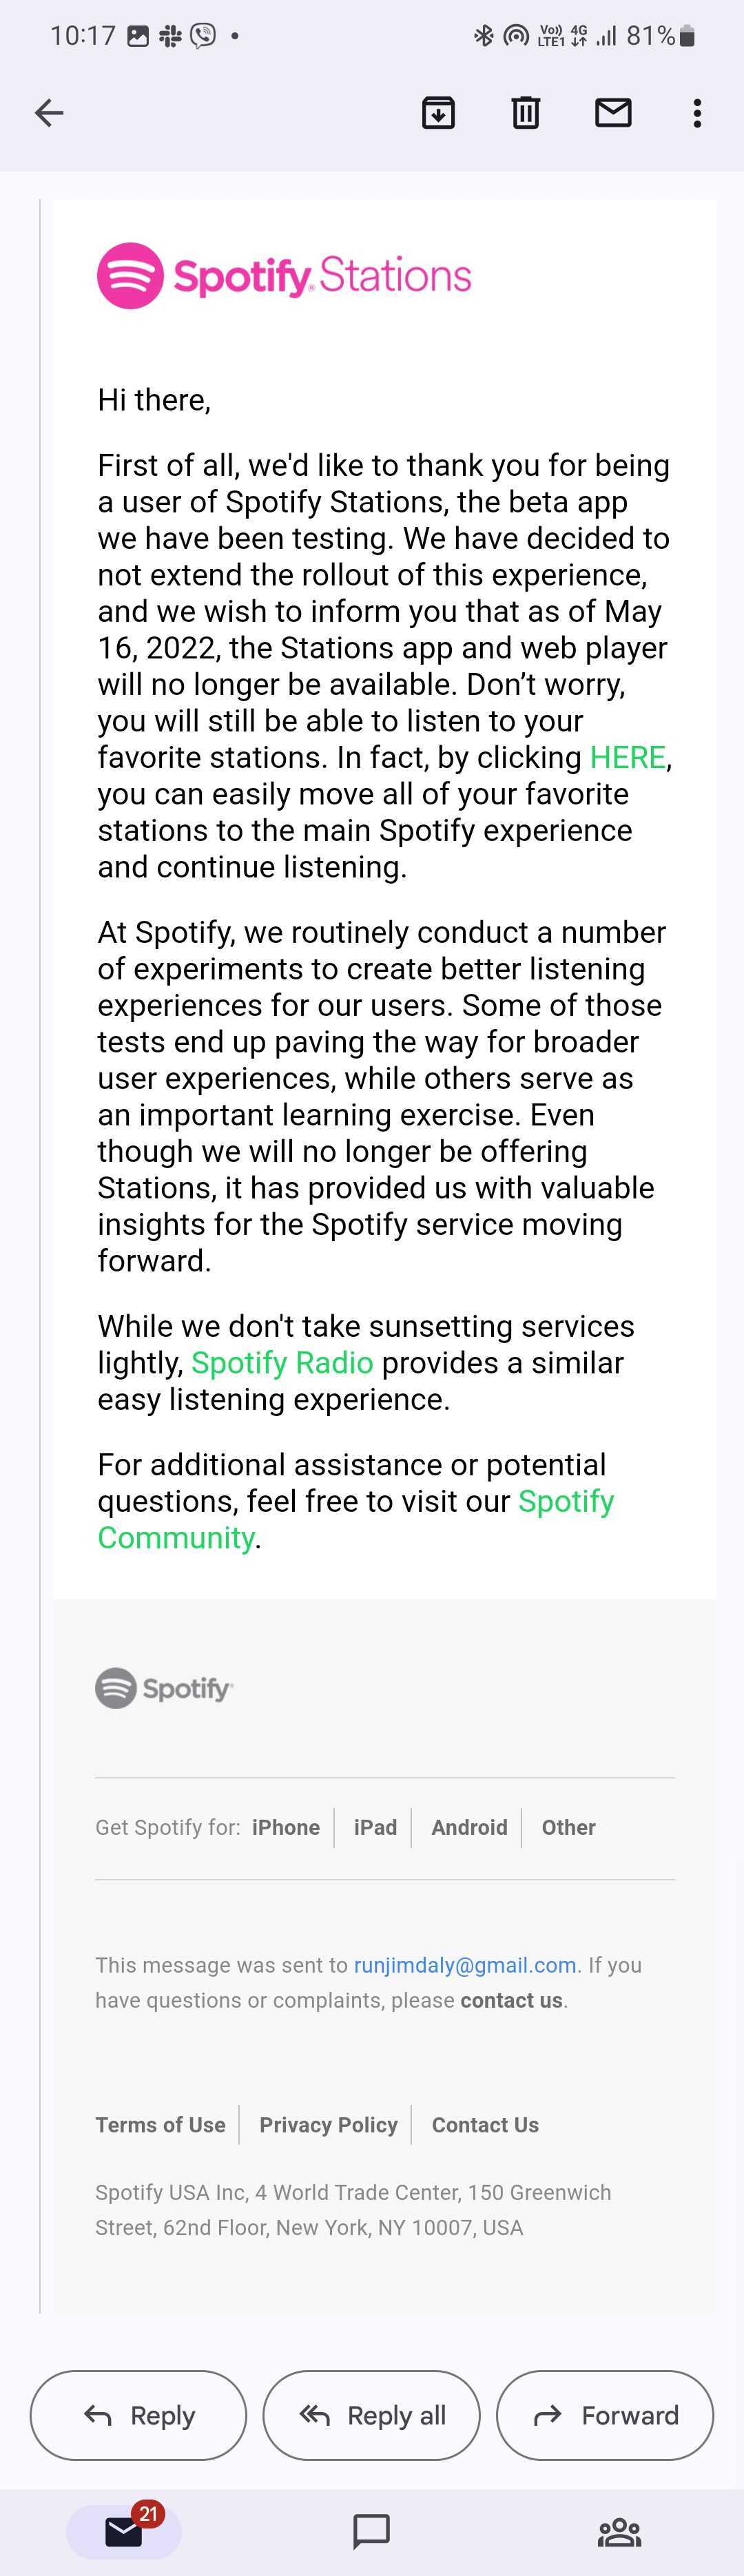 Saas Sunset Emails: Screenshot of Spotify Station's product sunset email